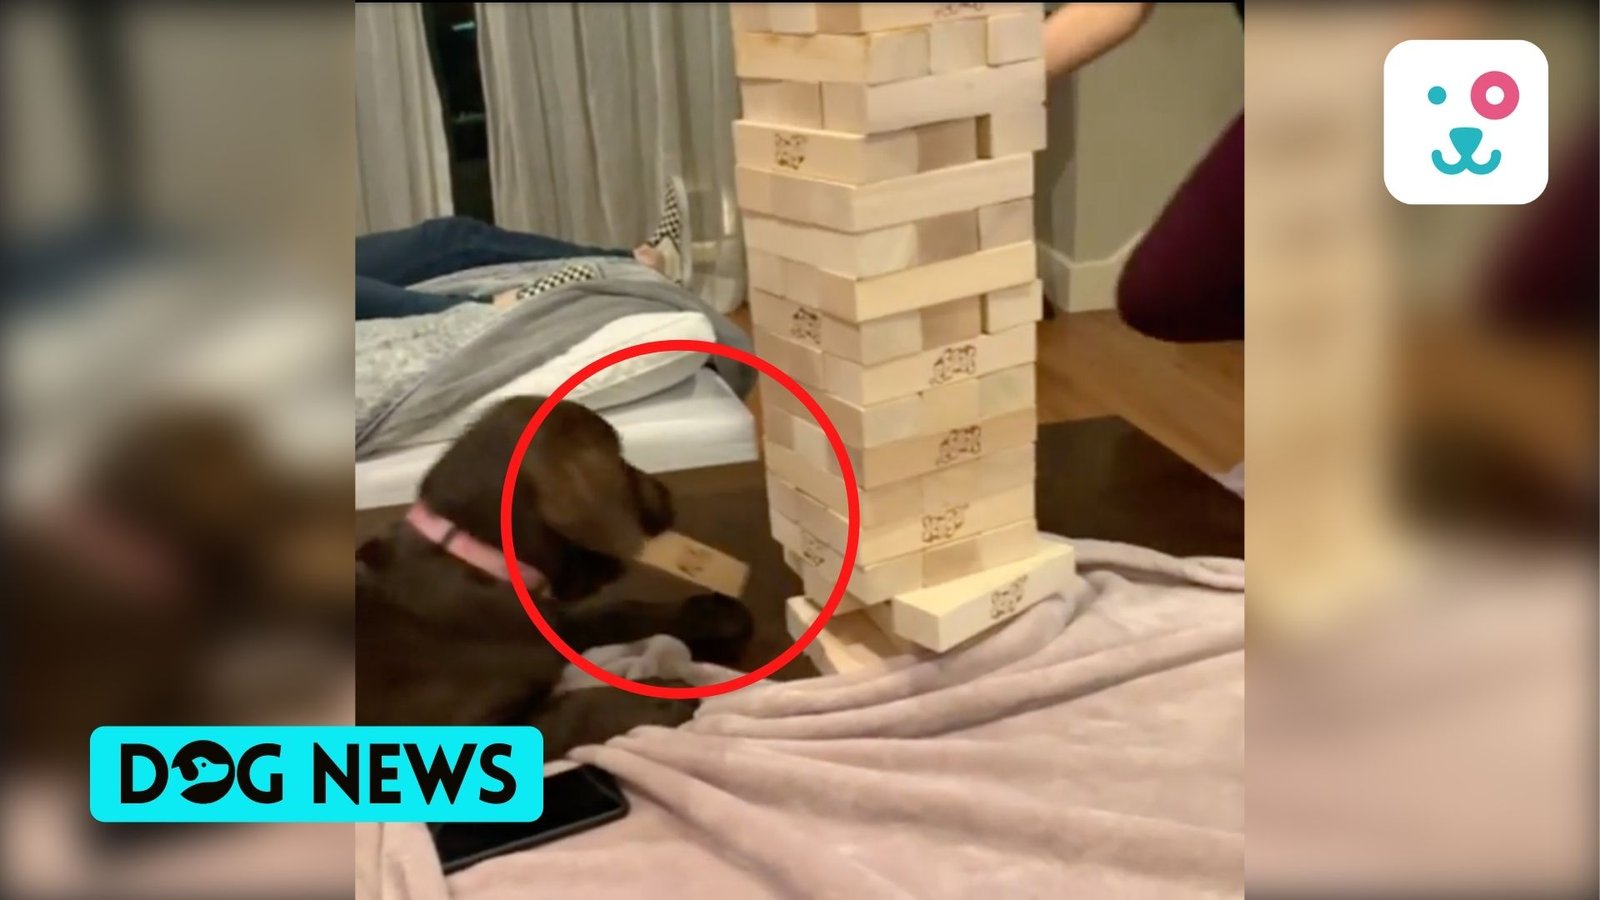 An Old Video of a Dog playing Jenga like a Pro went viral again.